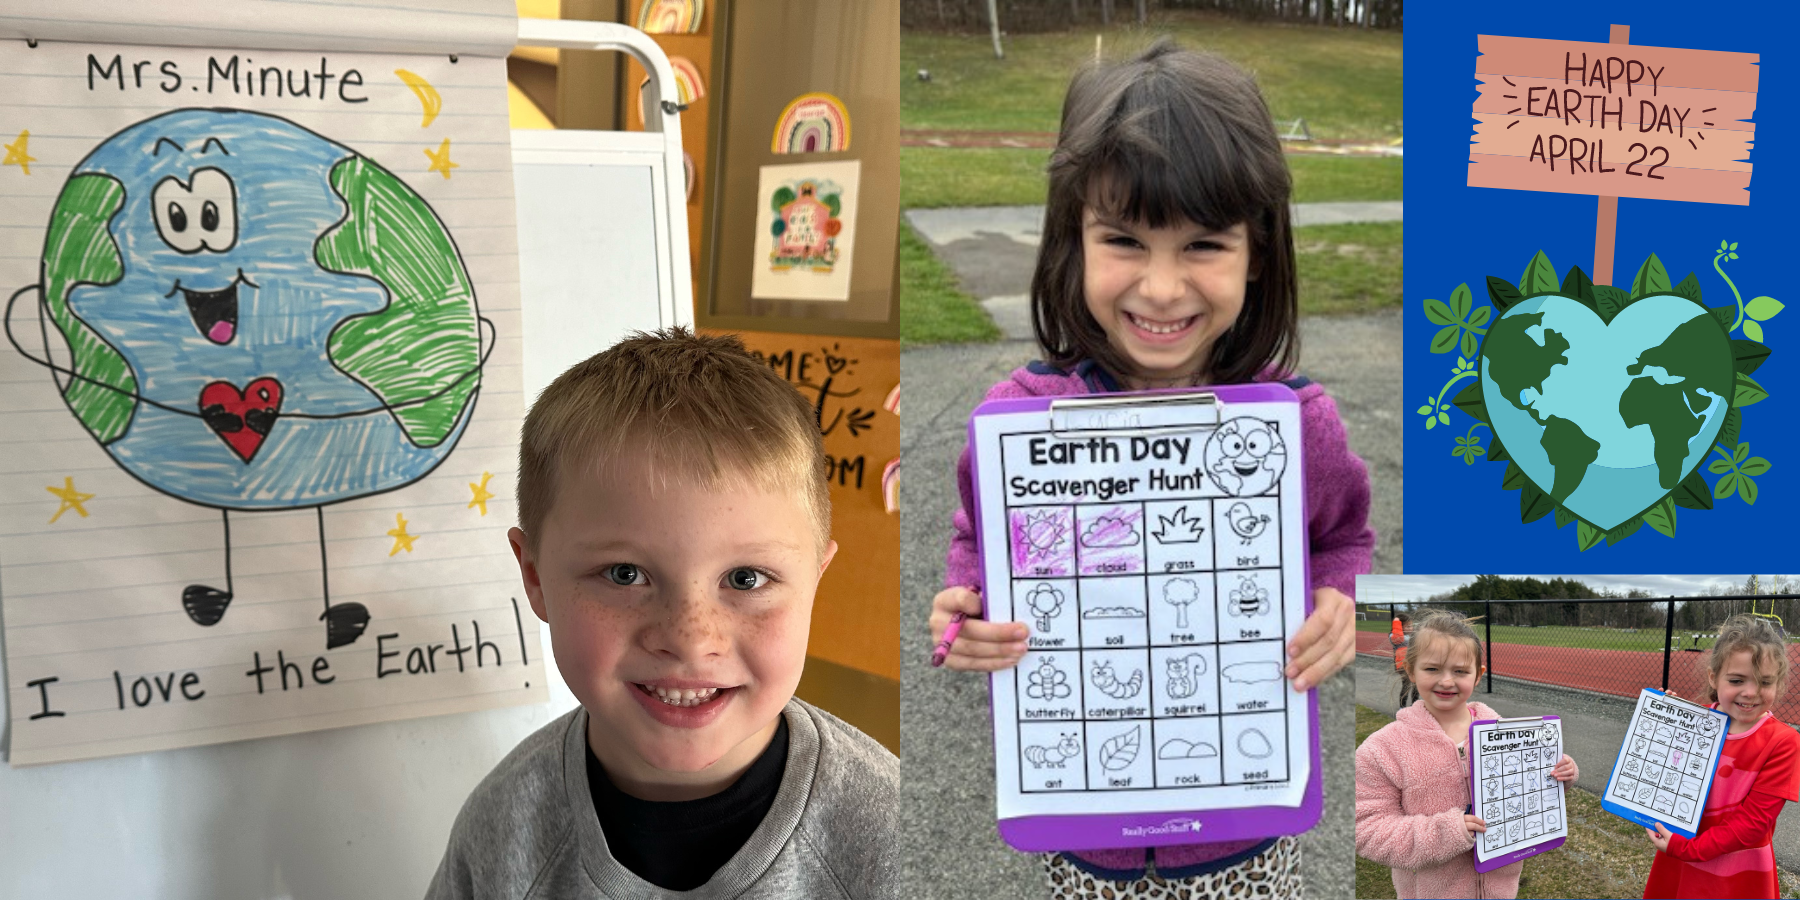 children showing Earth Day-themed artwork 